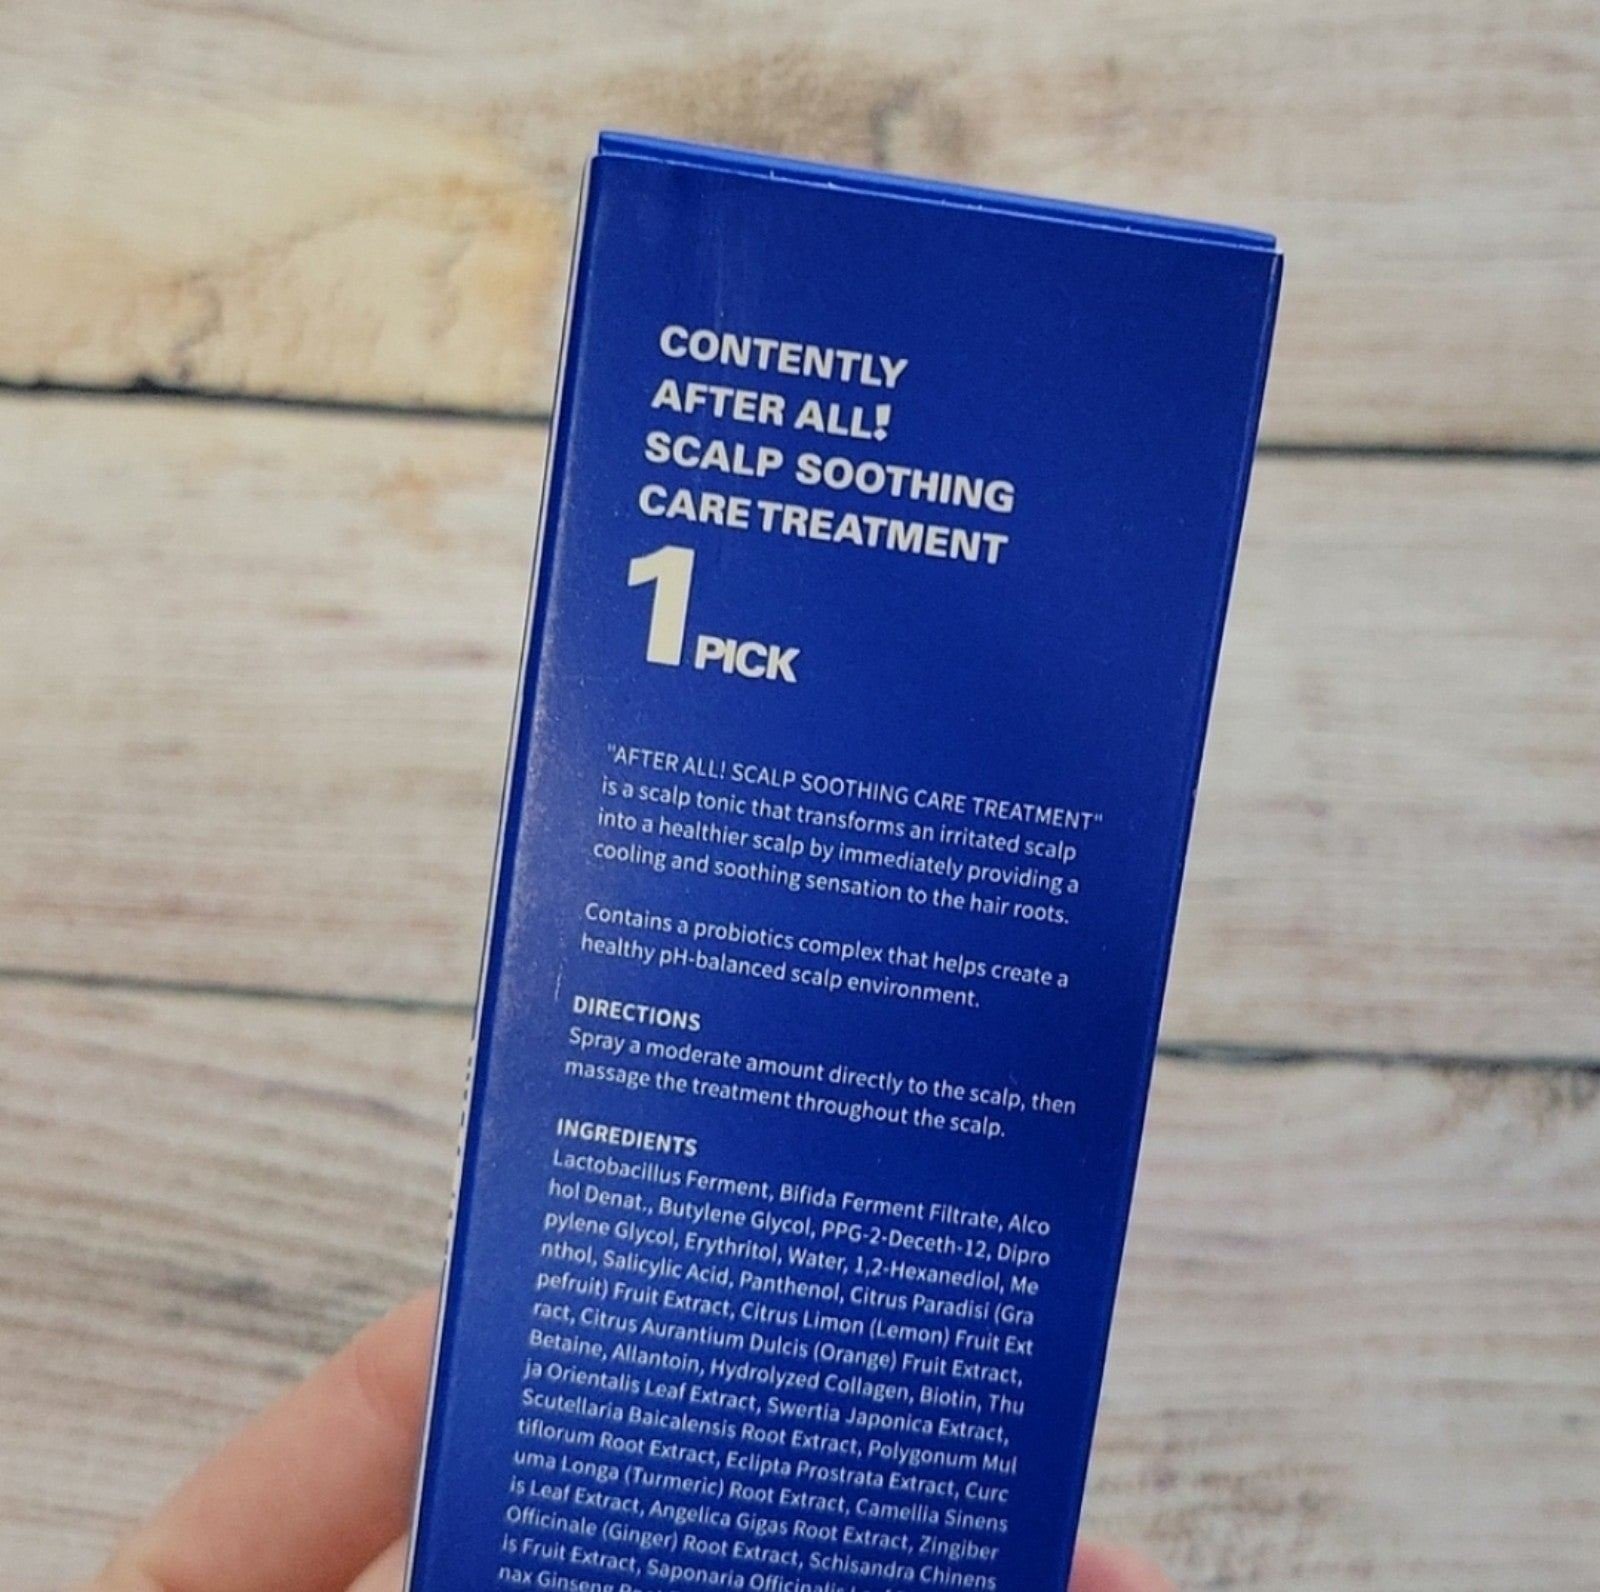 CONTENTLY After All! Scalp Soothing Care Treatment New fUEWENk4e